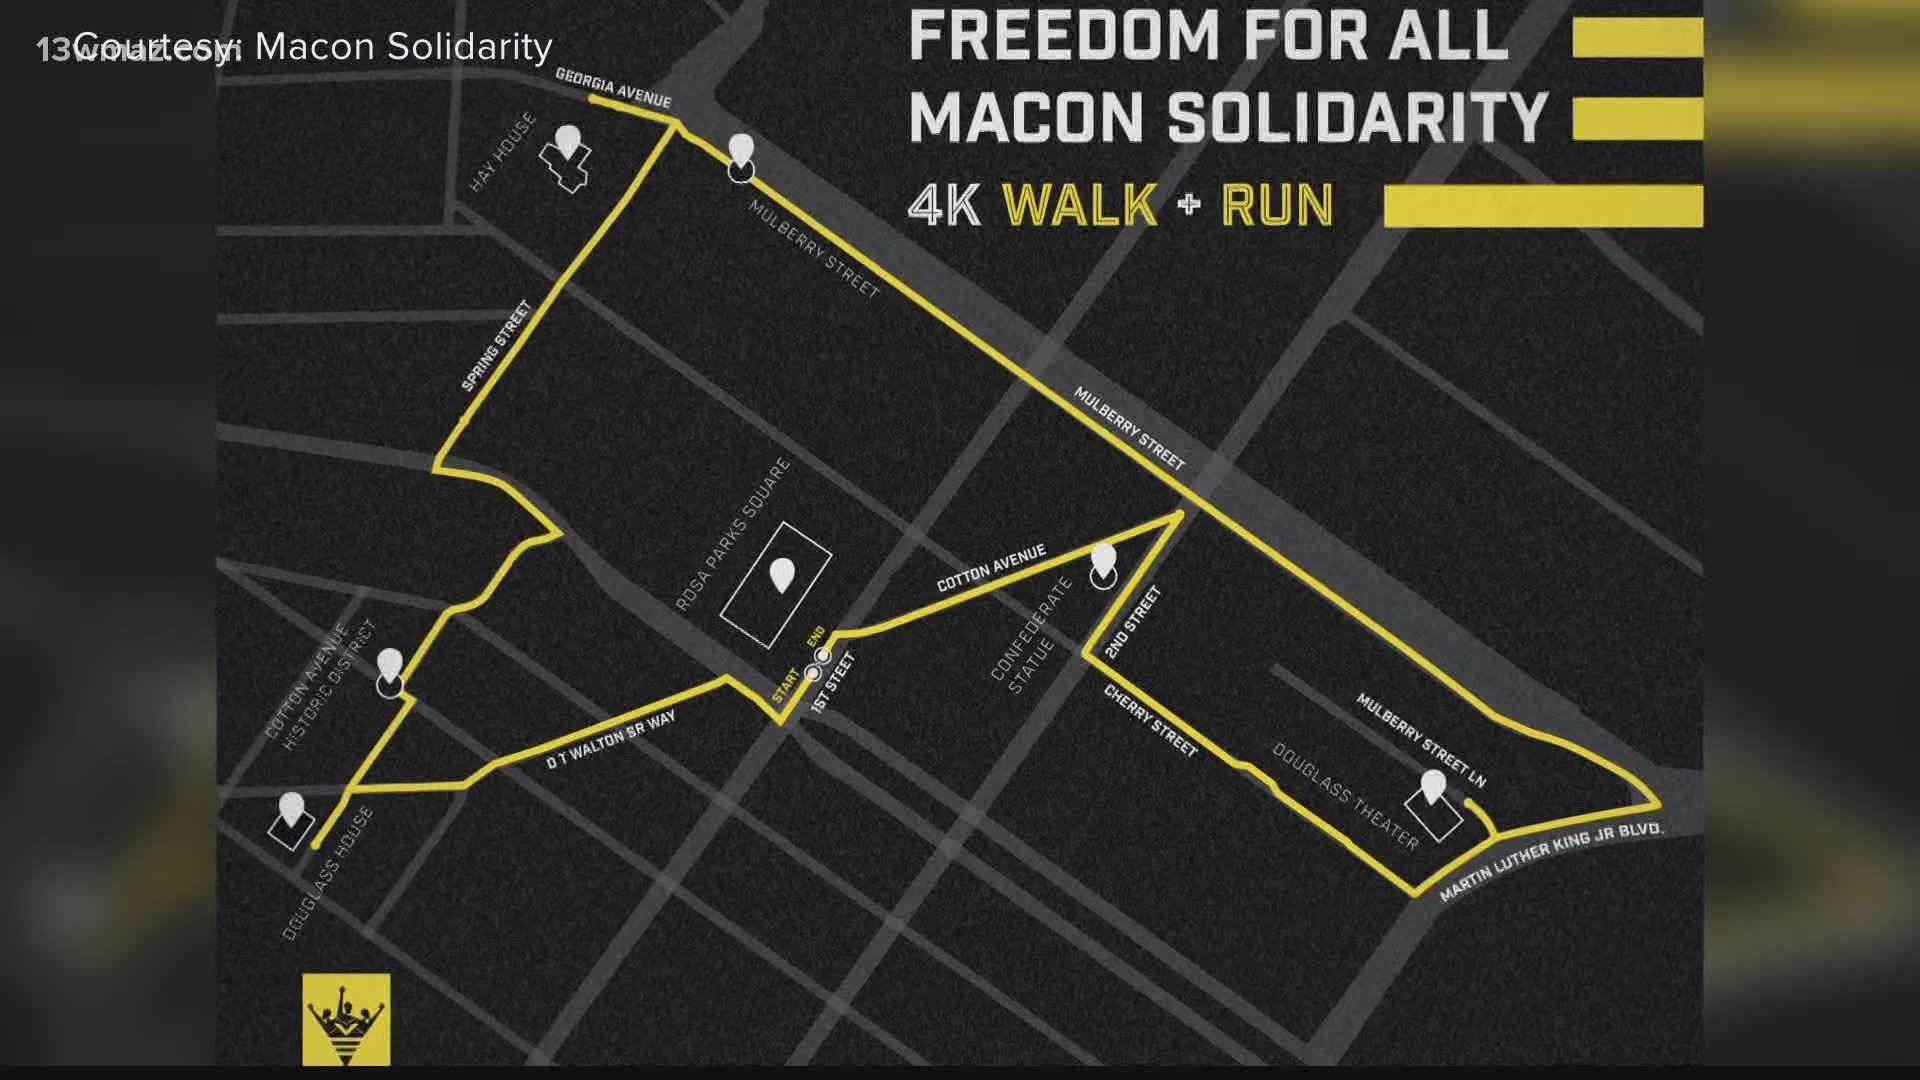 The Freedom for All 4K will take participants through some of Macon's racial history, starting and ending at Rosa Parks Square.